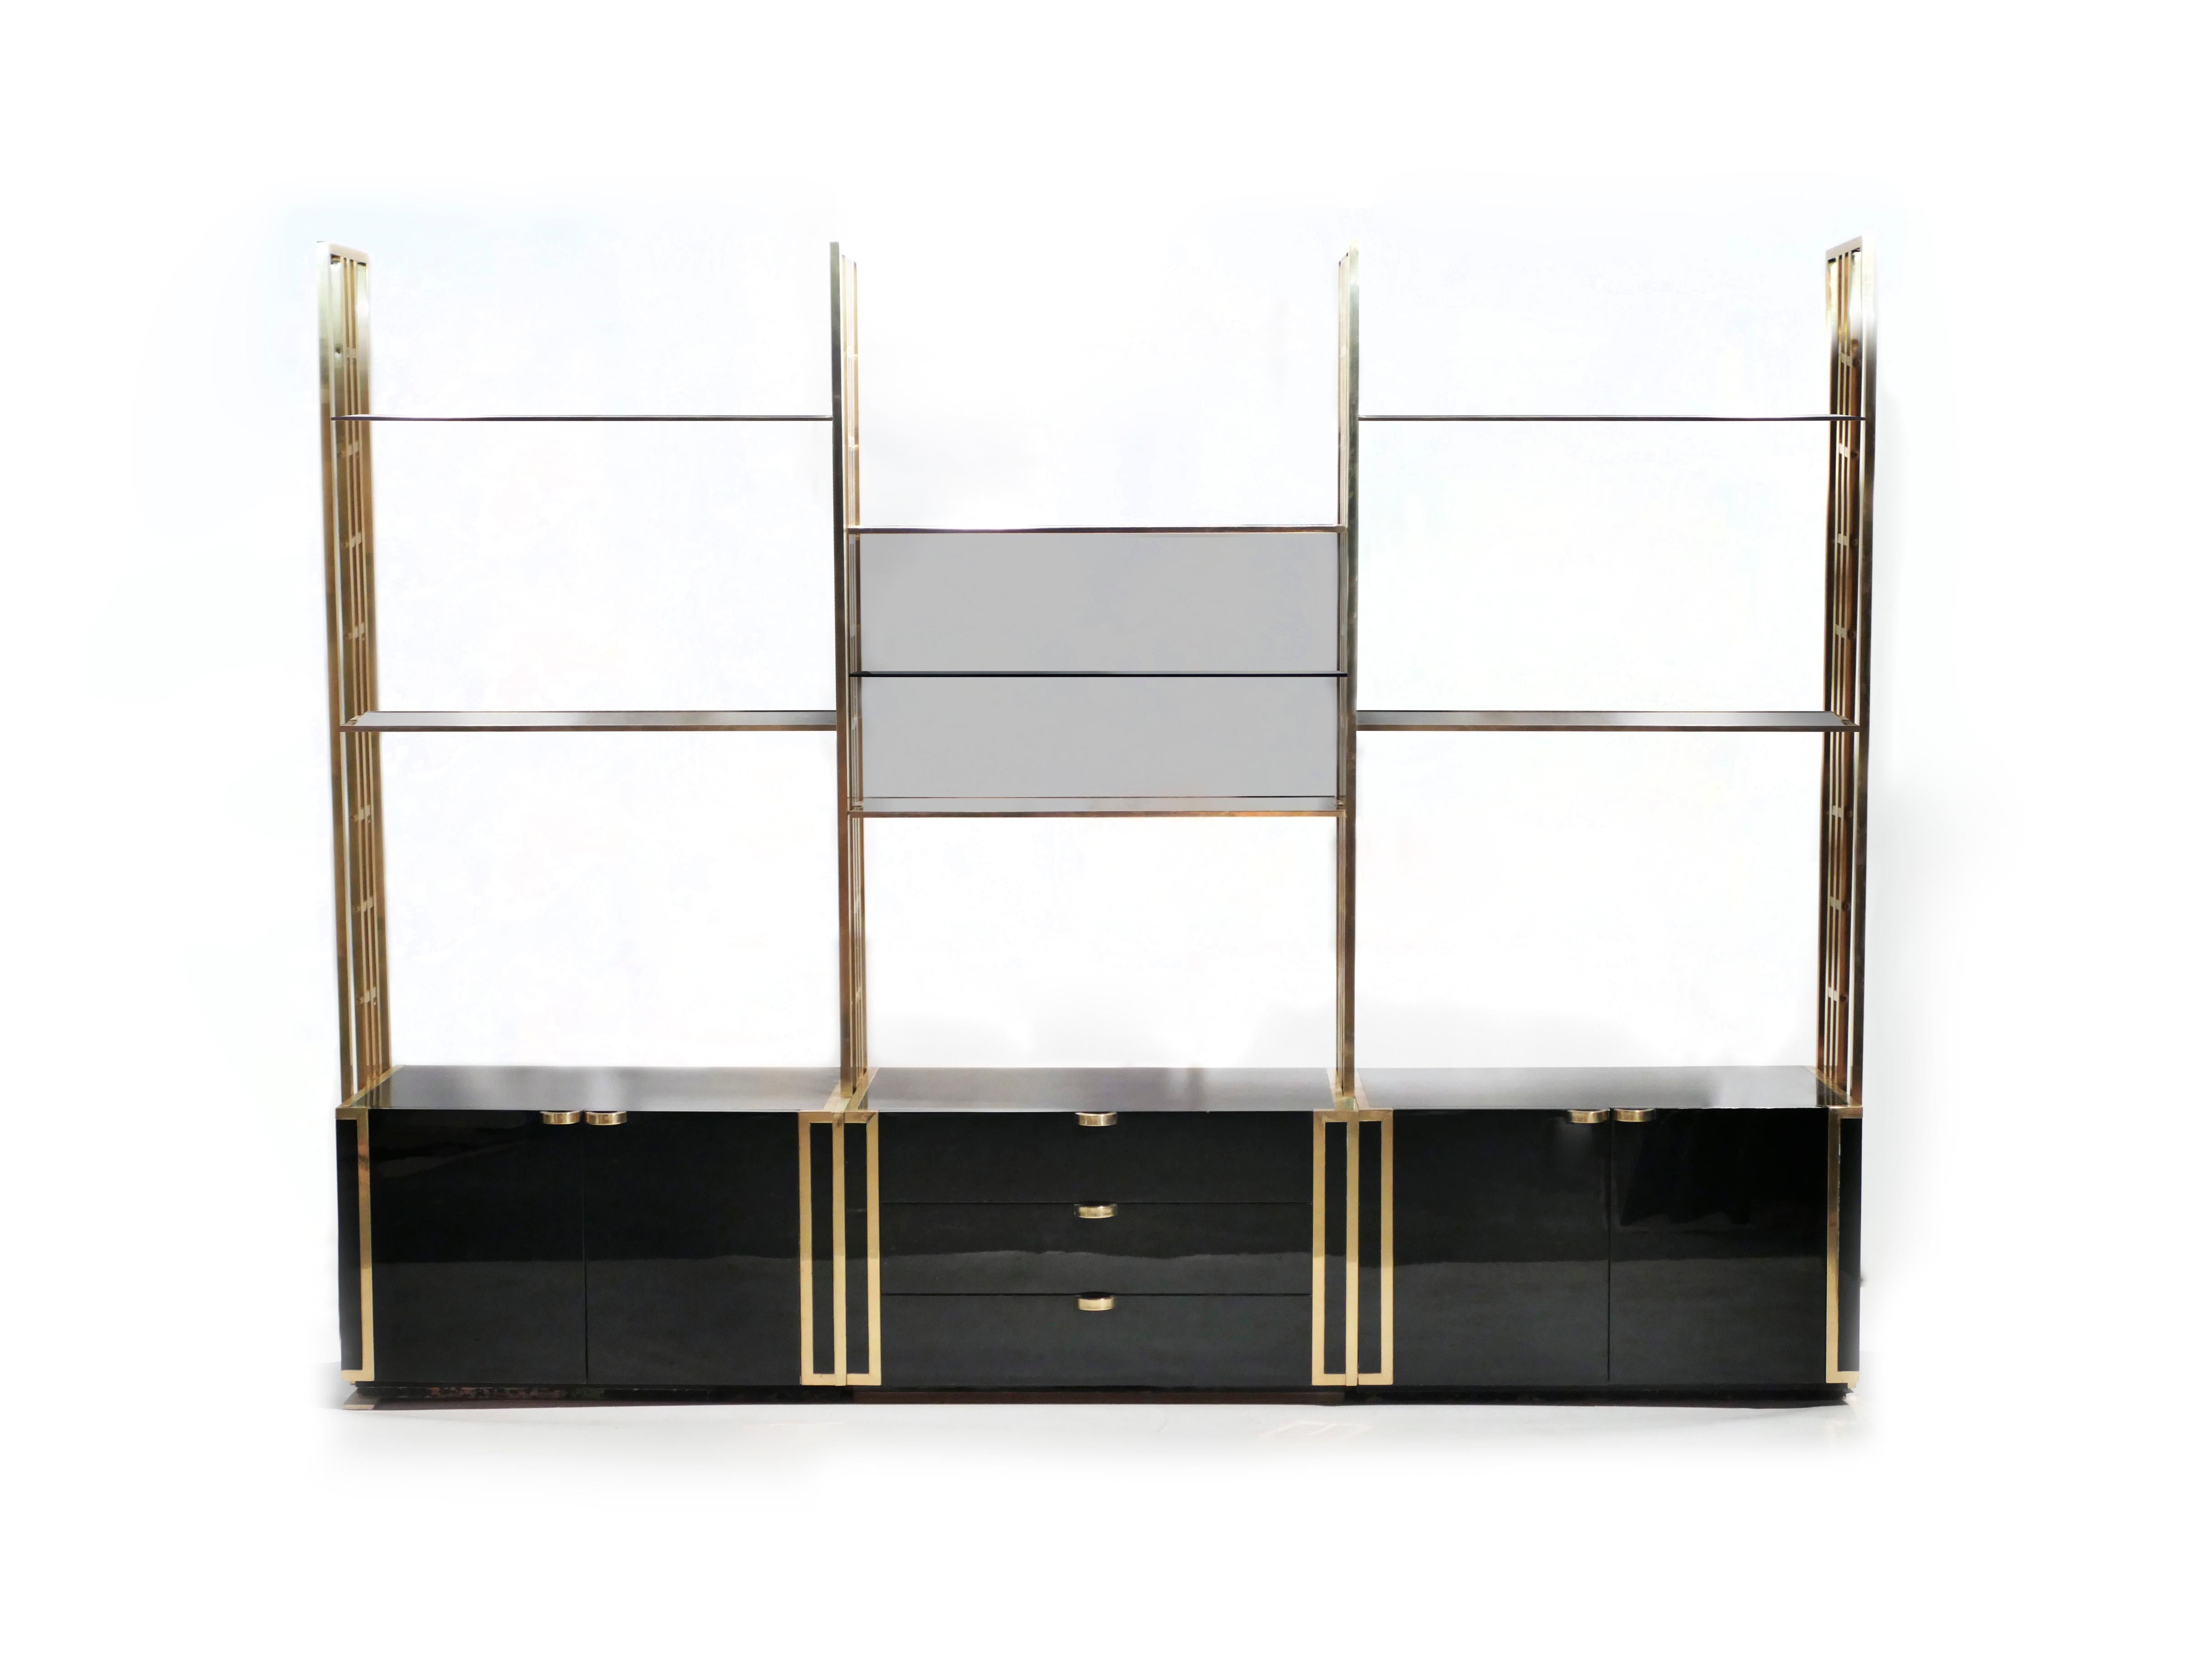 Functional and stylish, this shelving unit or bookcase has a brilliant brass structure, blue smoked glass shelves, and black lacquer cabinets. Designed by Kim Moltzer in the 1970s the piece was built and edited in France with superior quality.